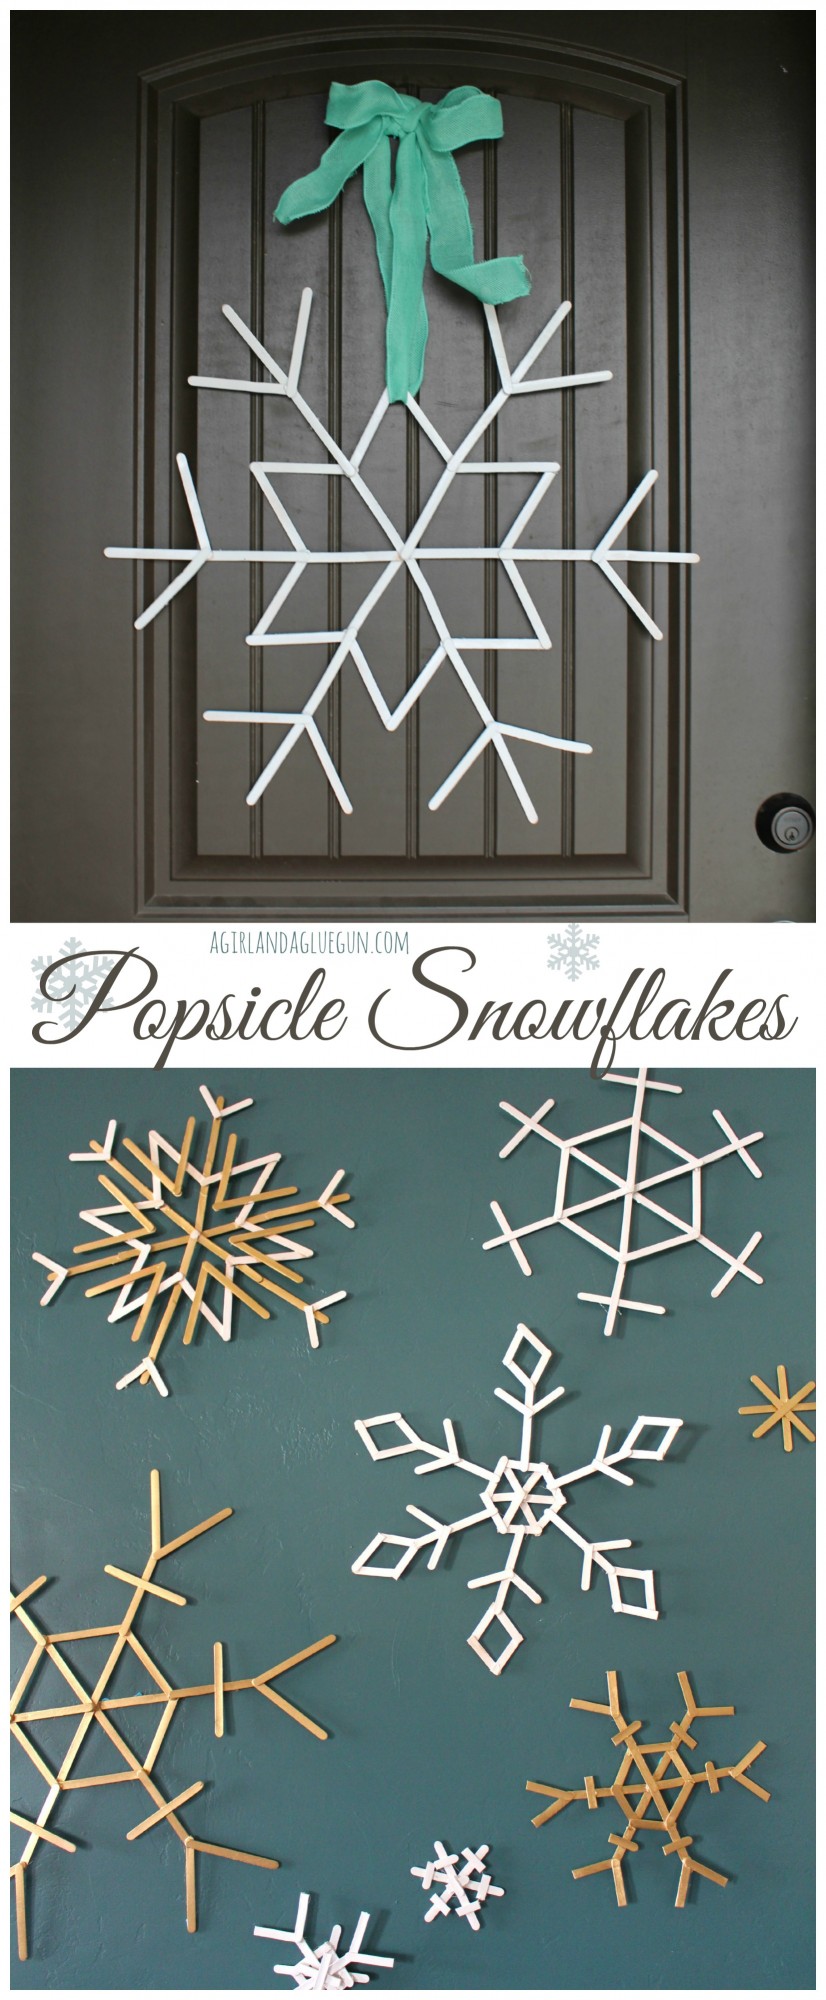 Popsicle Snowflakes Crafts